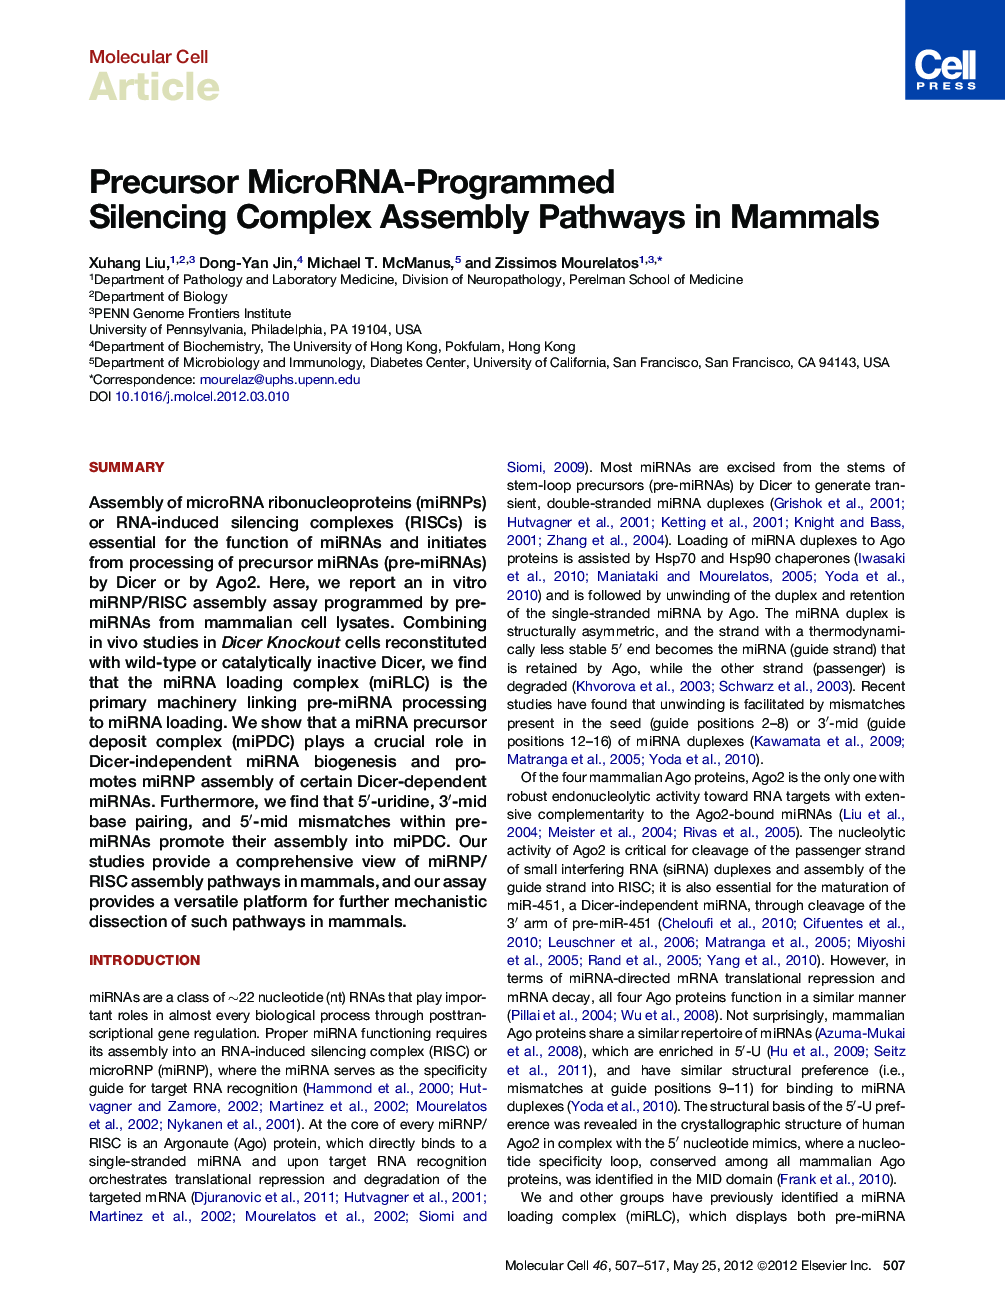 Precursor MicroRNA-Programmed Silencing Complex Assembly Pathways in Mammals